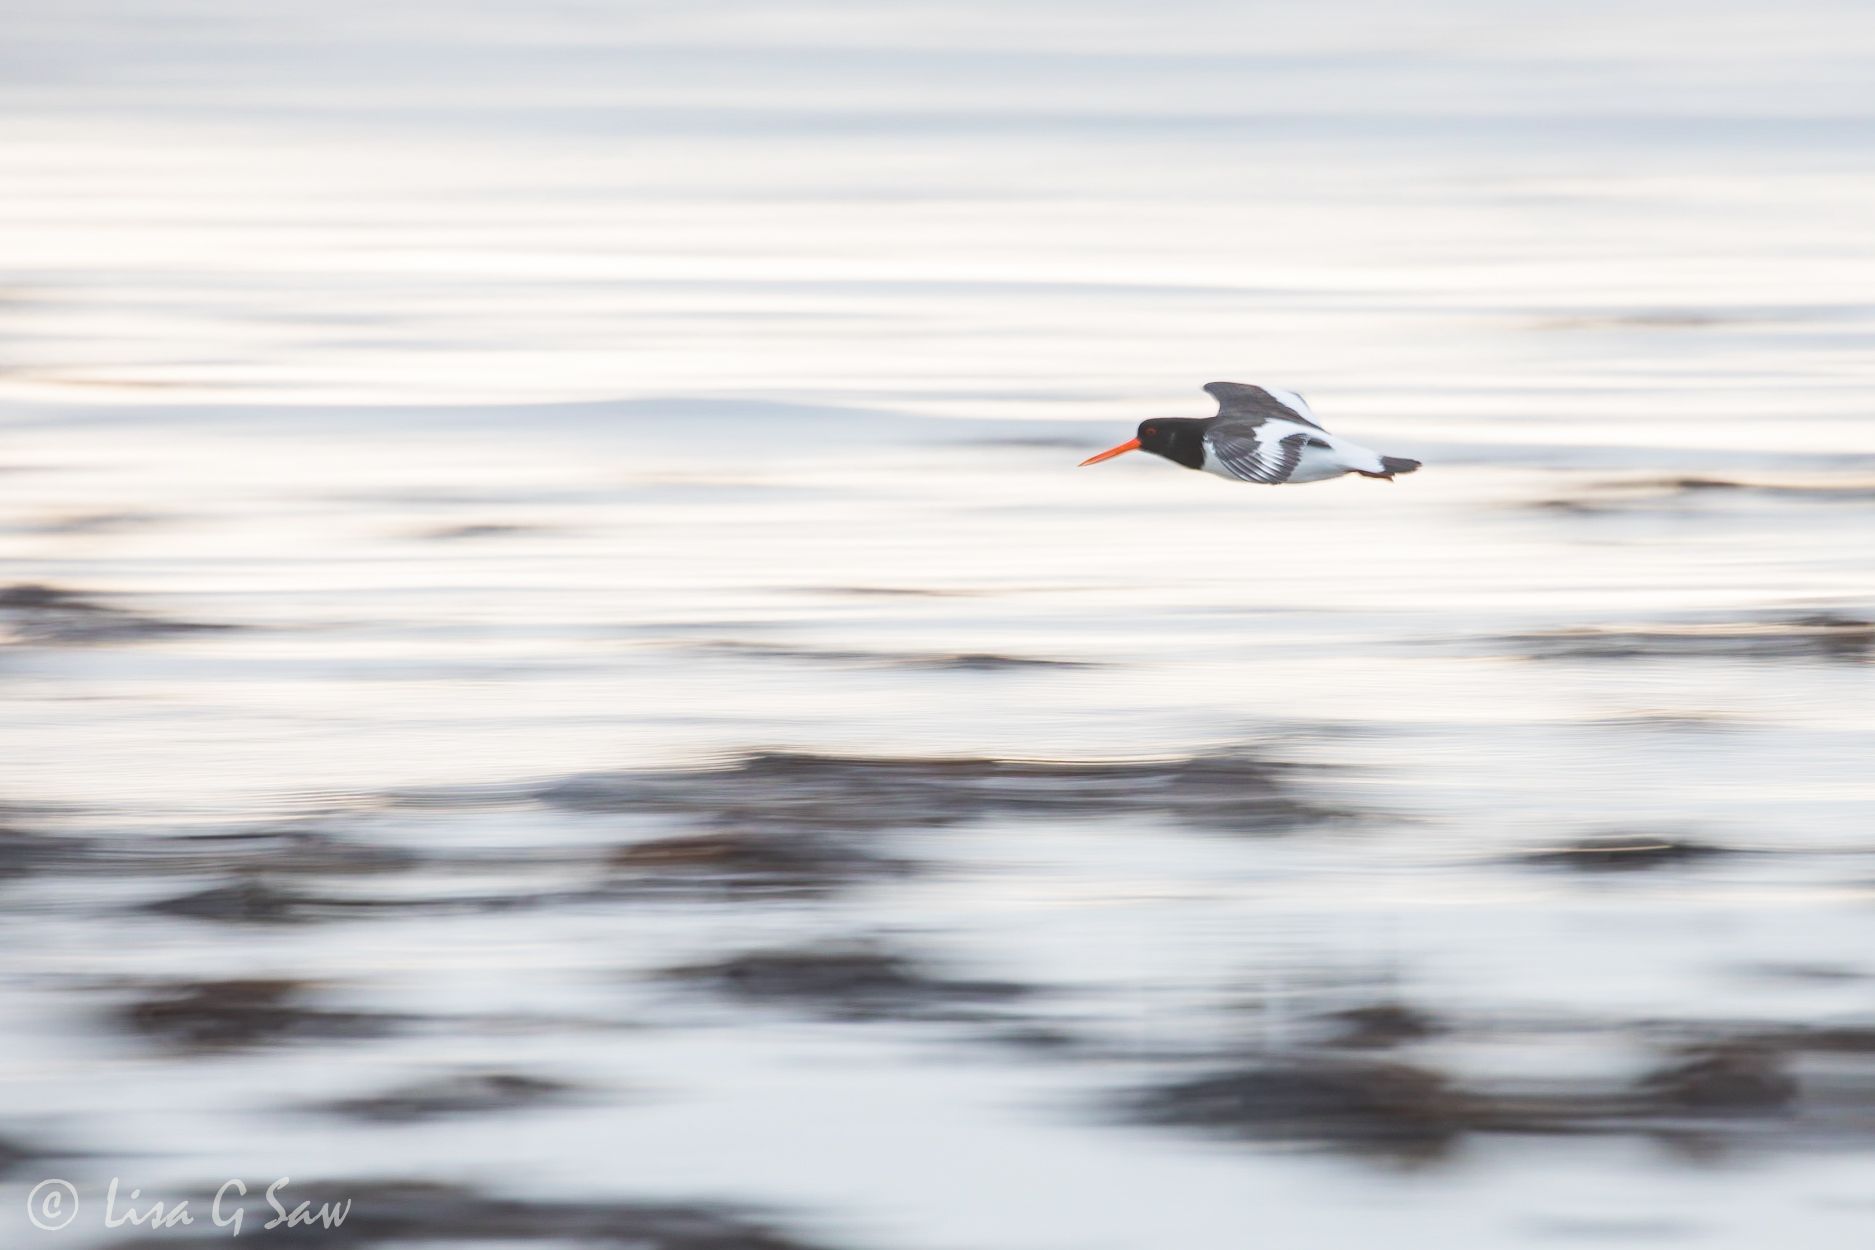 Slow panning an Oystercatcher flying